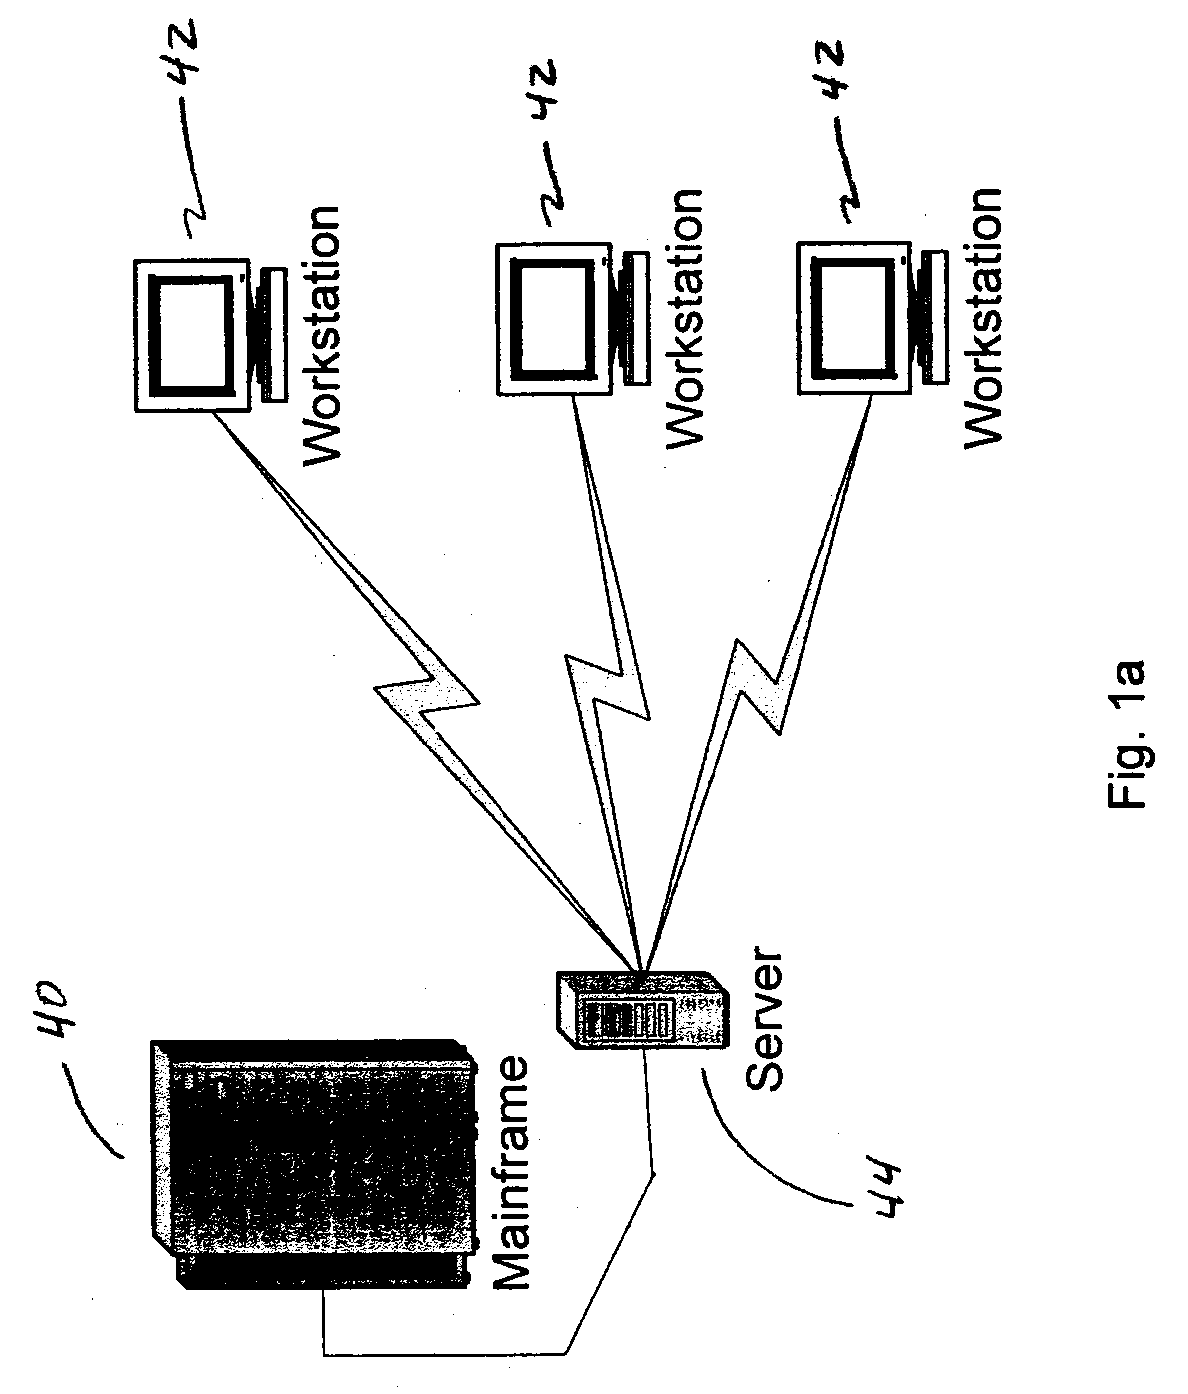 Trading system and method having a configurable market depth tool with dynamic price axis